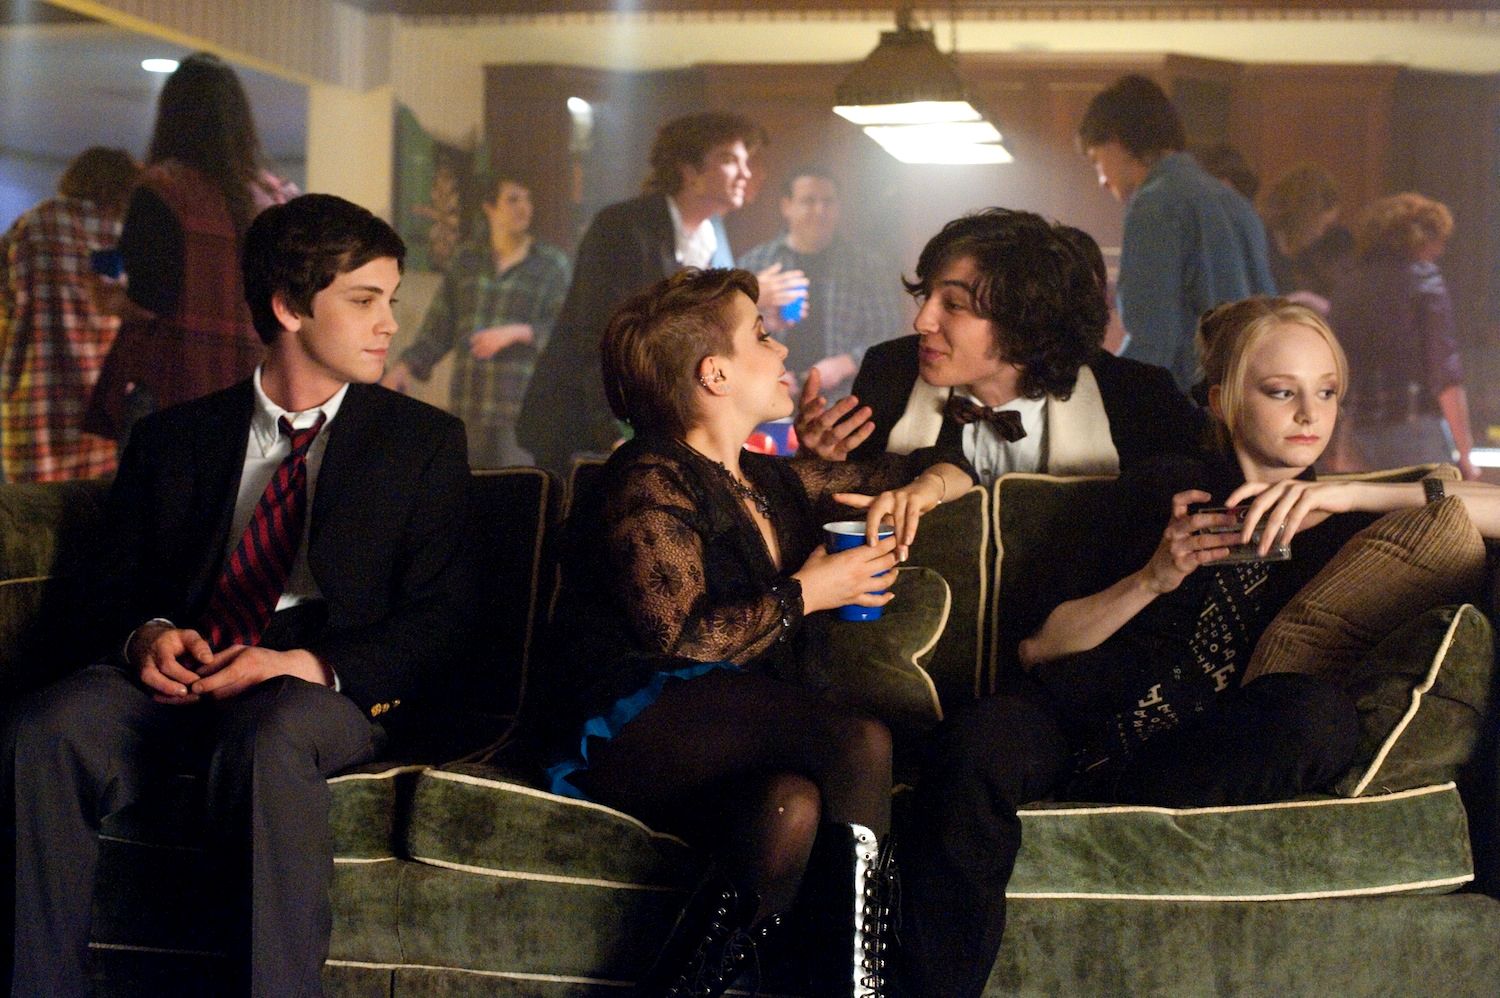 The Perks Of Being A Wallflower: The Perks Of Being A Wallflower OST V —